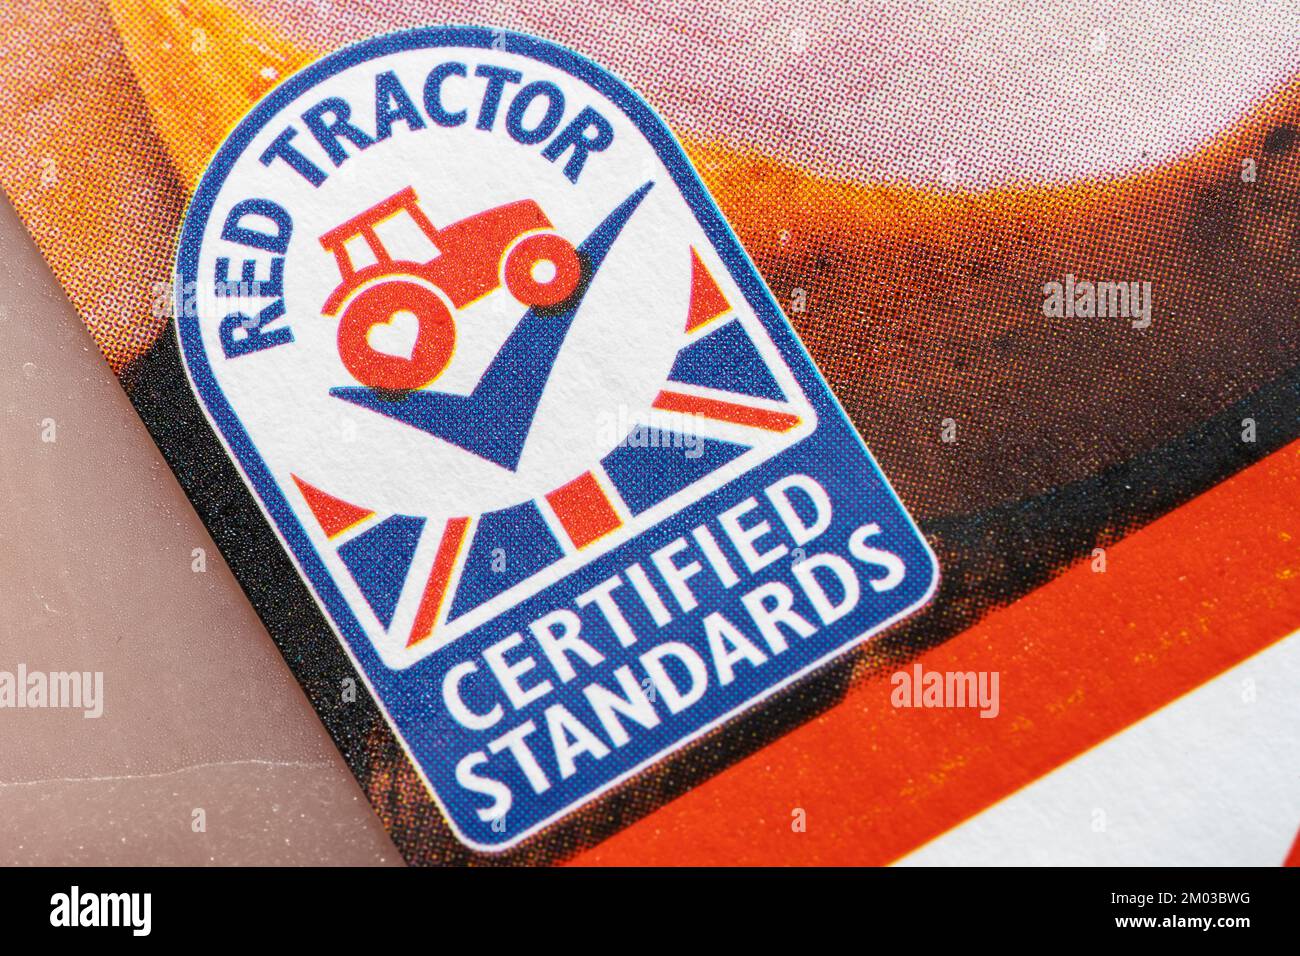 Closeup on Red Tractor logo. Assured Food Standards is a UK company which licenses the Red Tractor quality mark, a product certification programme Stock Photo